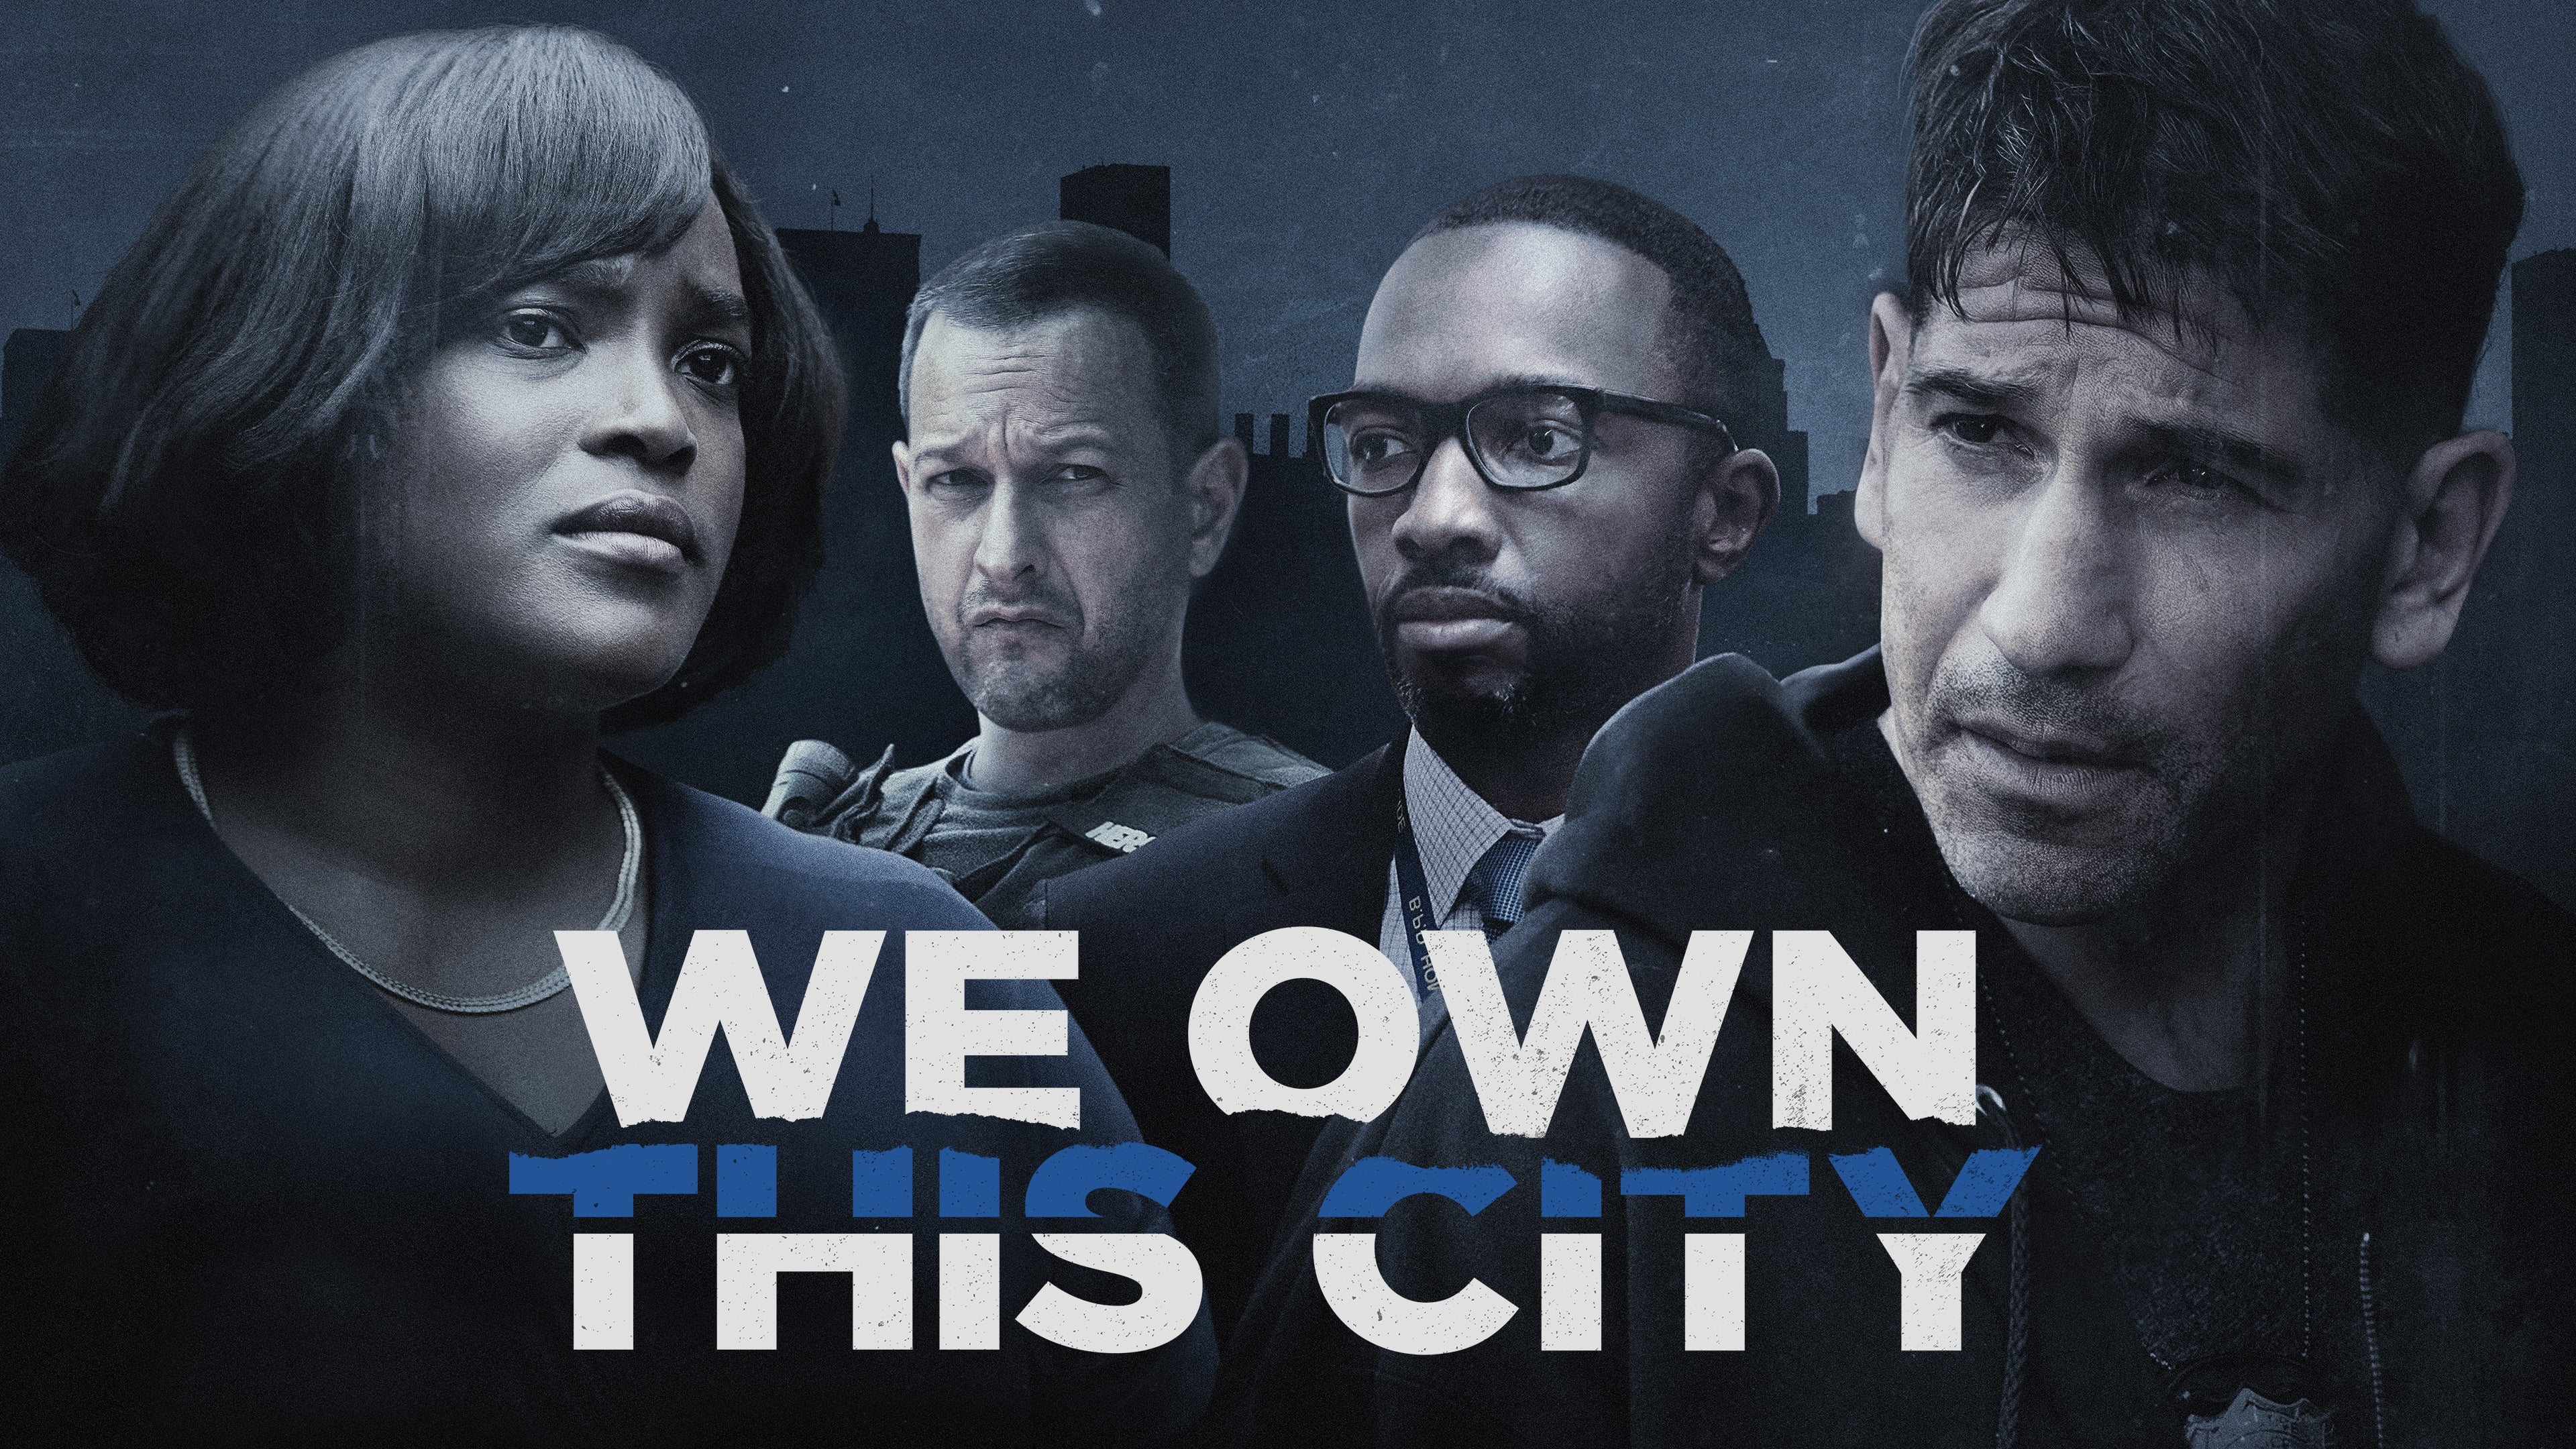 TV Show We Own This City 4k Ultra HD Wallpaper